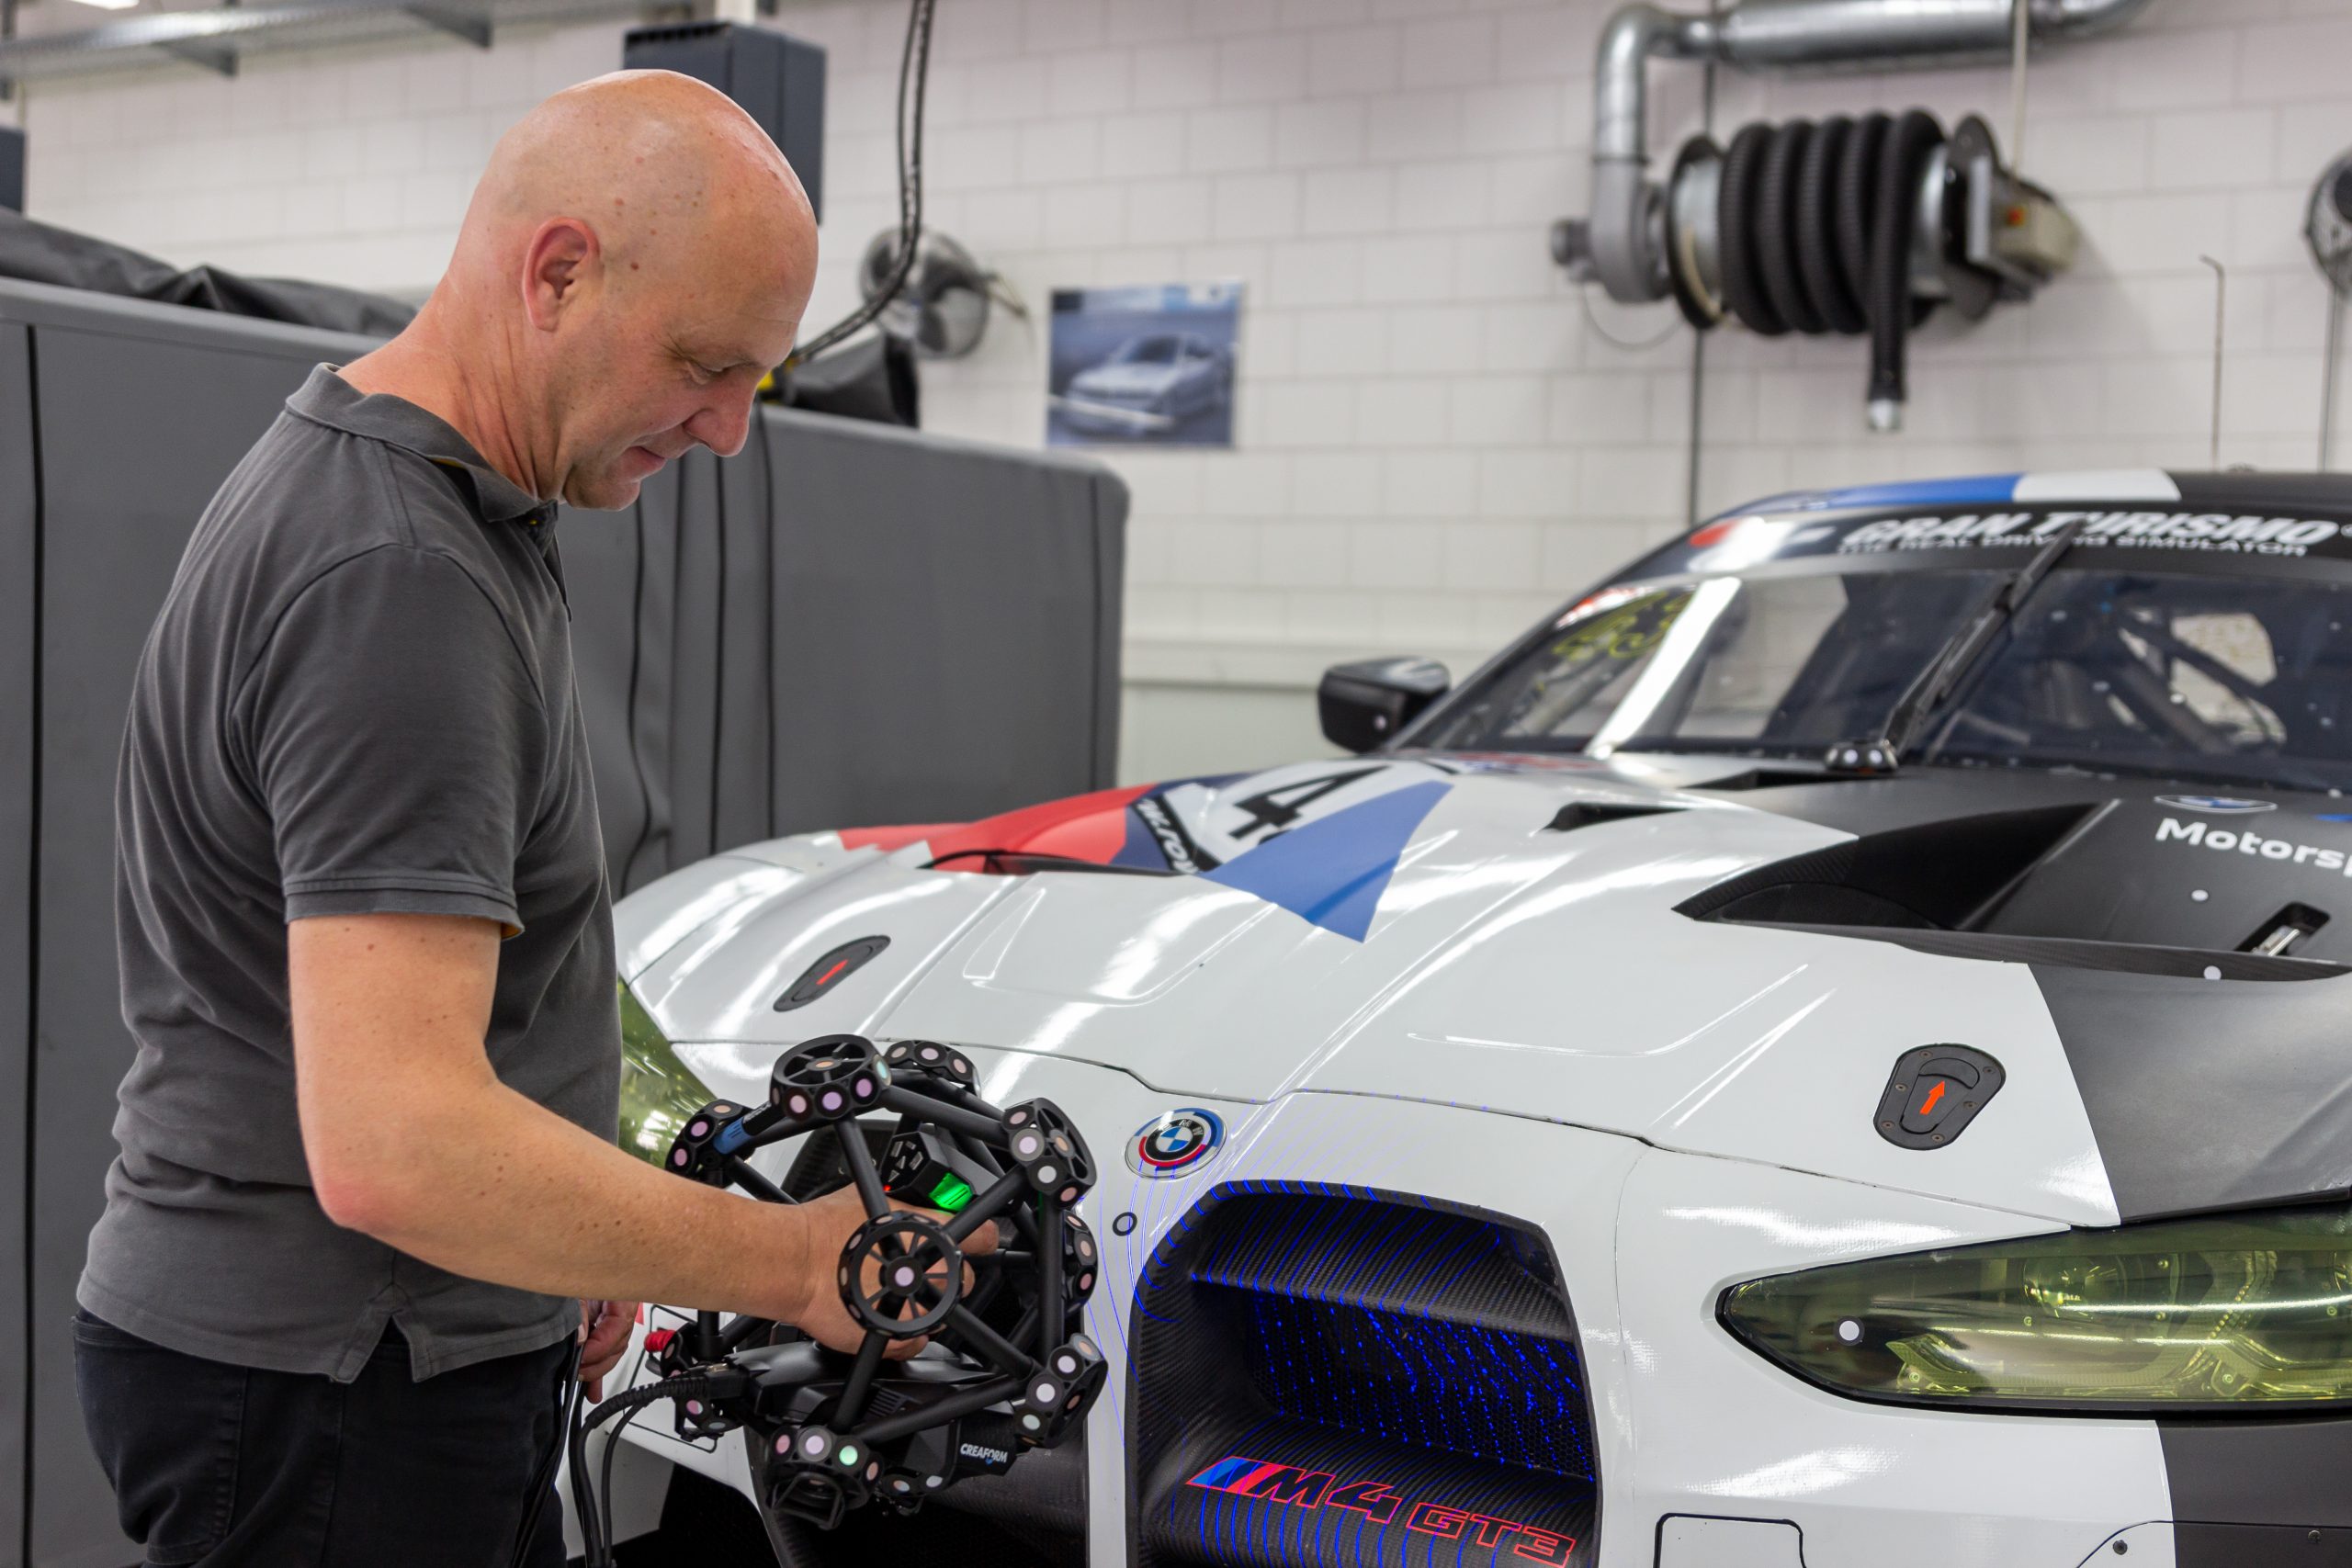 Complete vehicle measurement of a BMW GT3 racing car